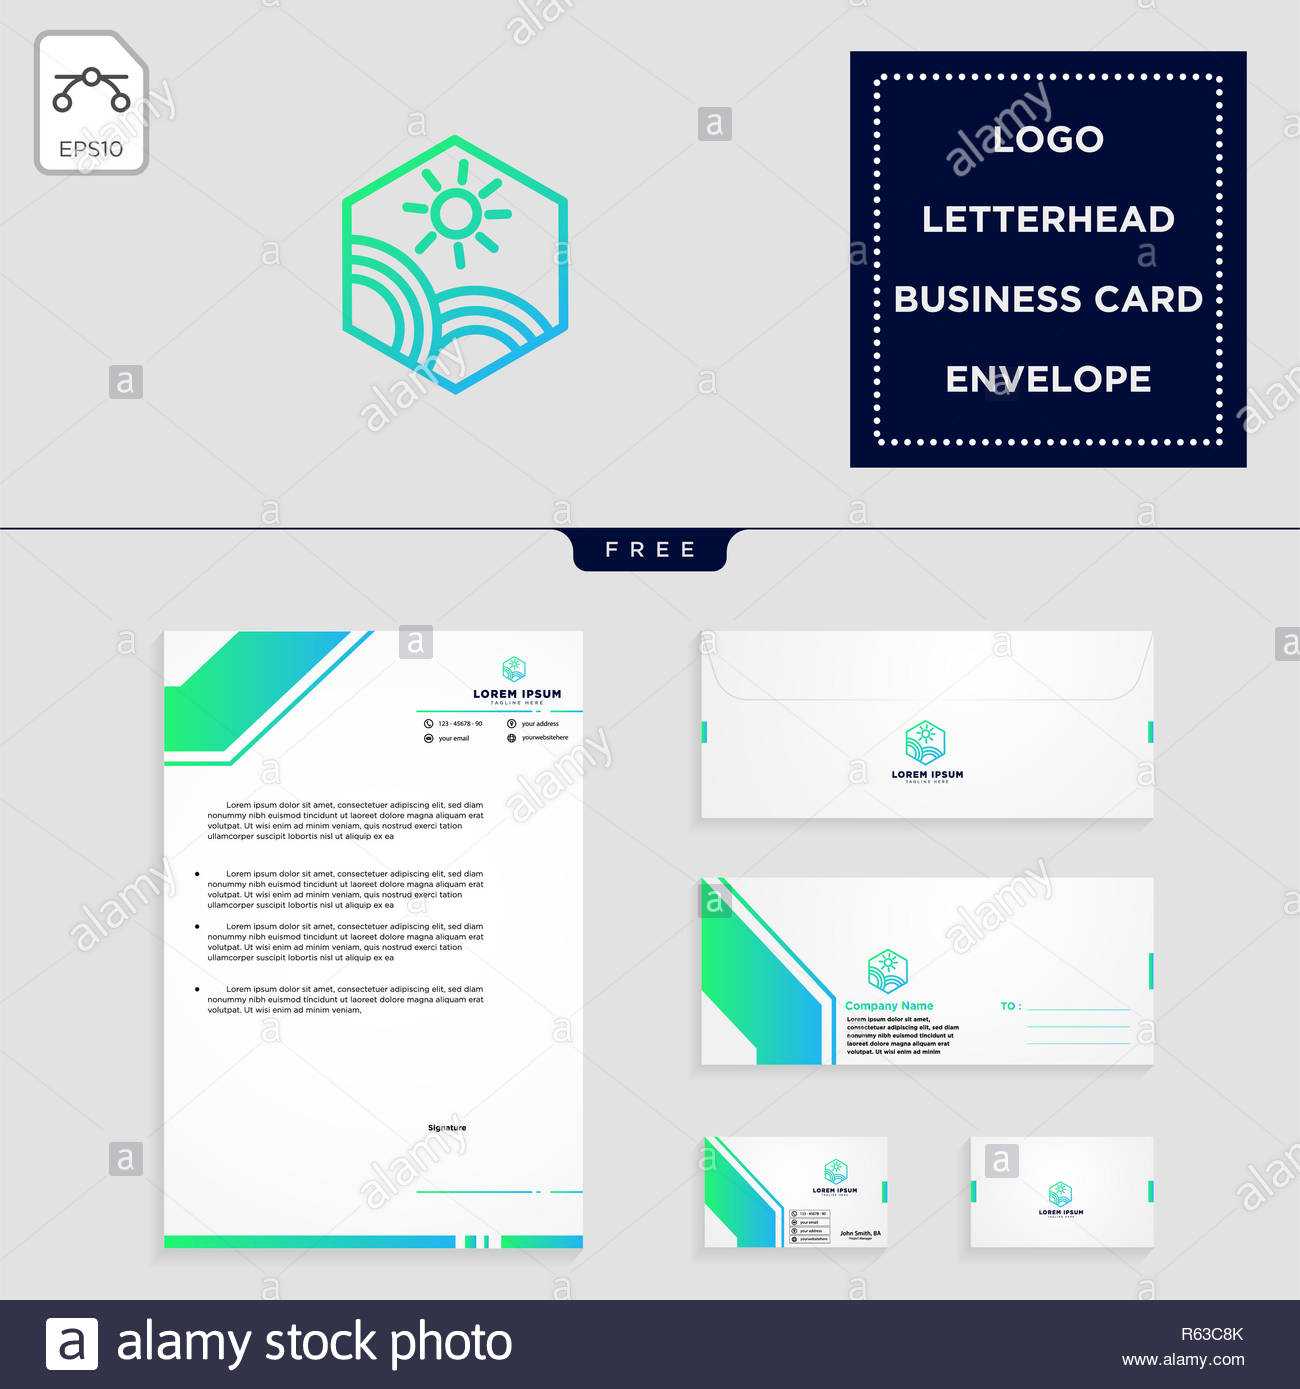 Beach,landscape, Holidays Logo Template Vector Illustration Within Business Card Letterhead Envelope Template